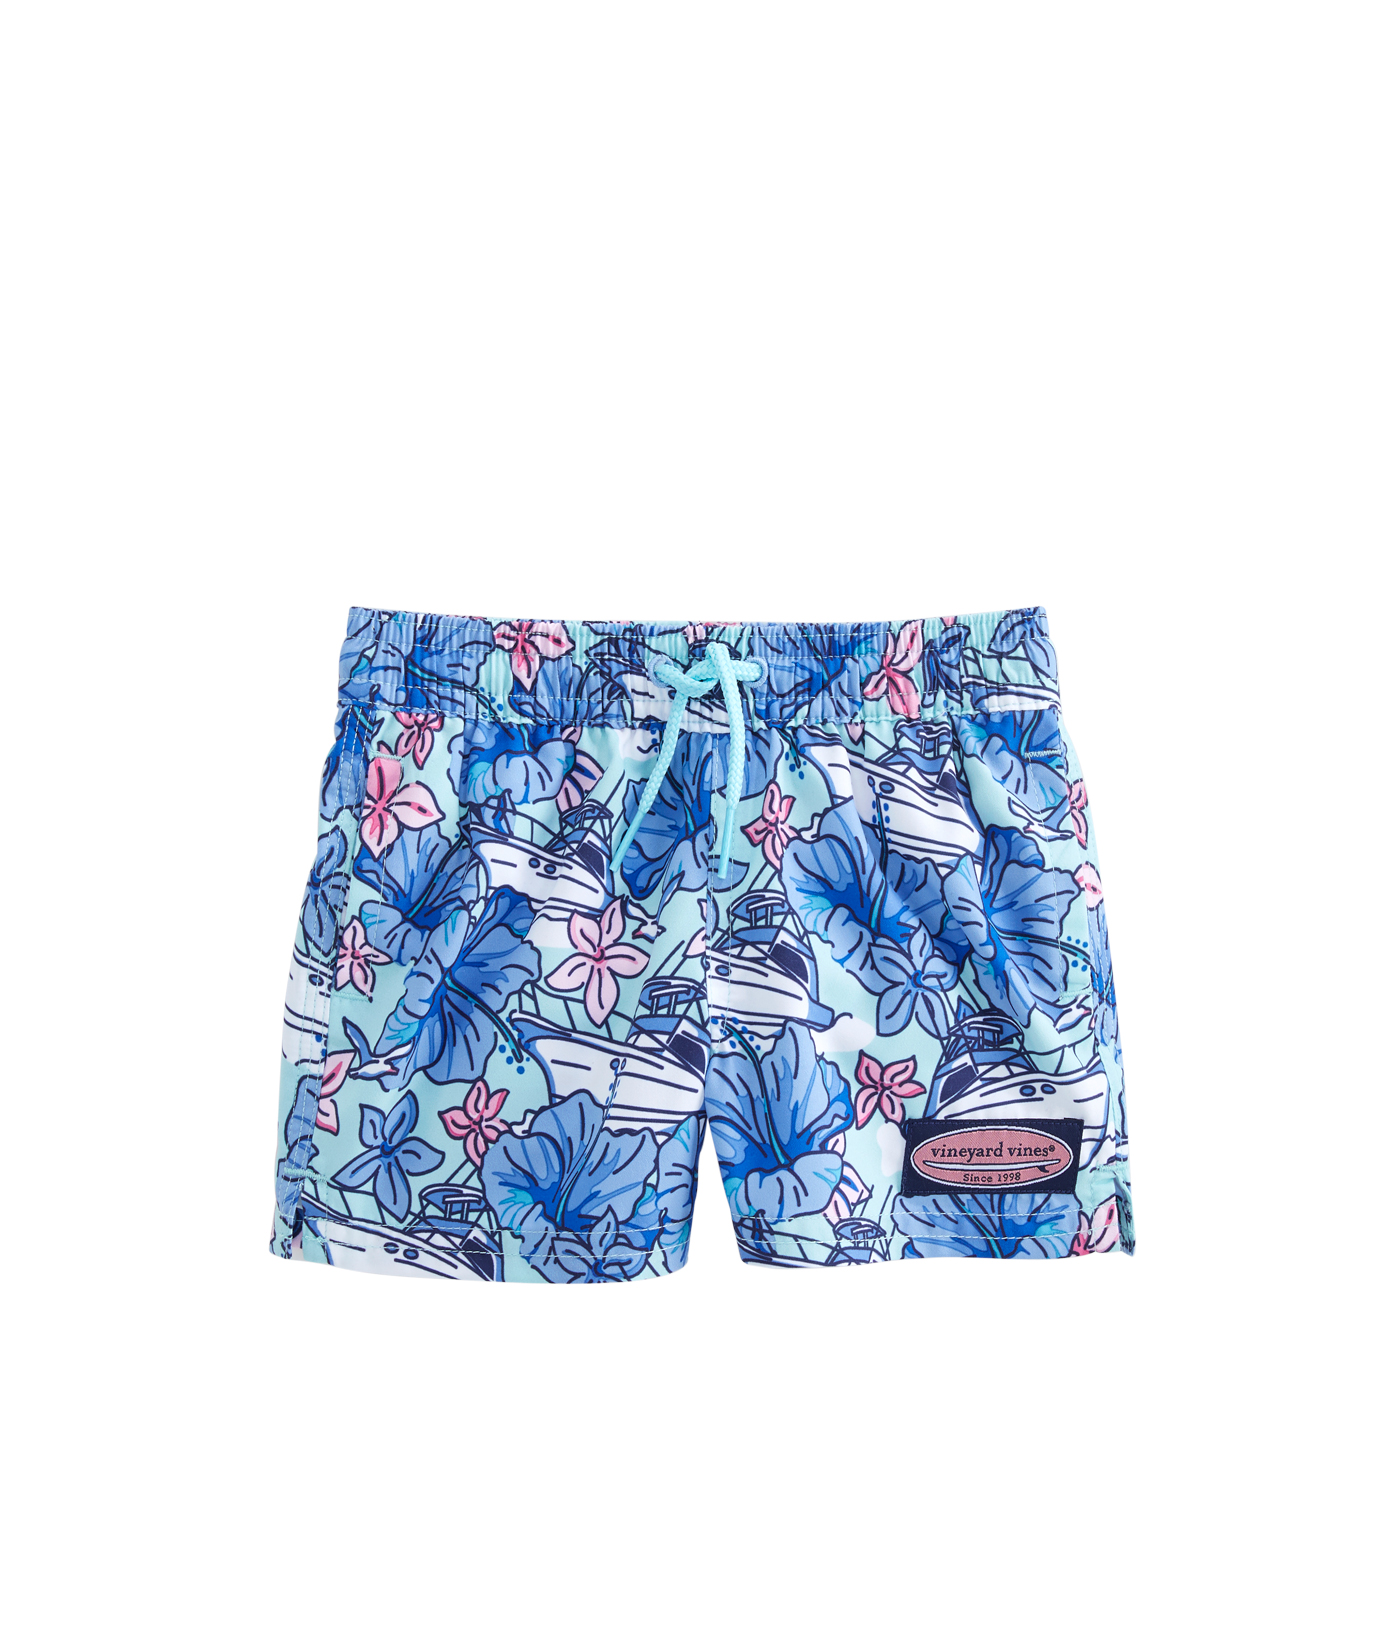 Shop Baby Chappy Trunks at vineyard vines